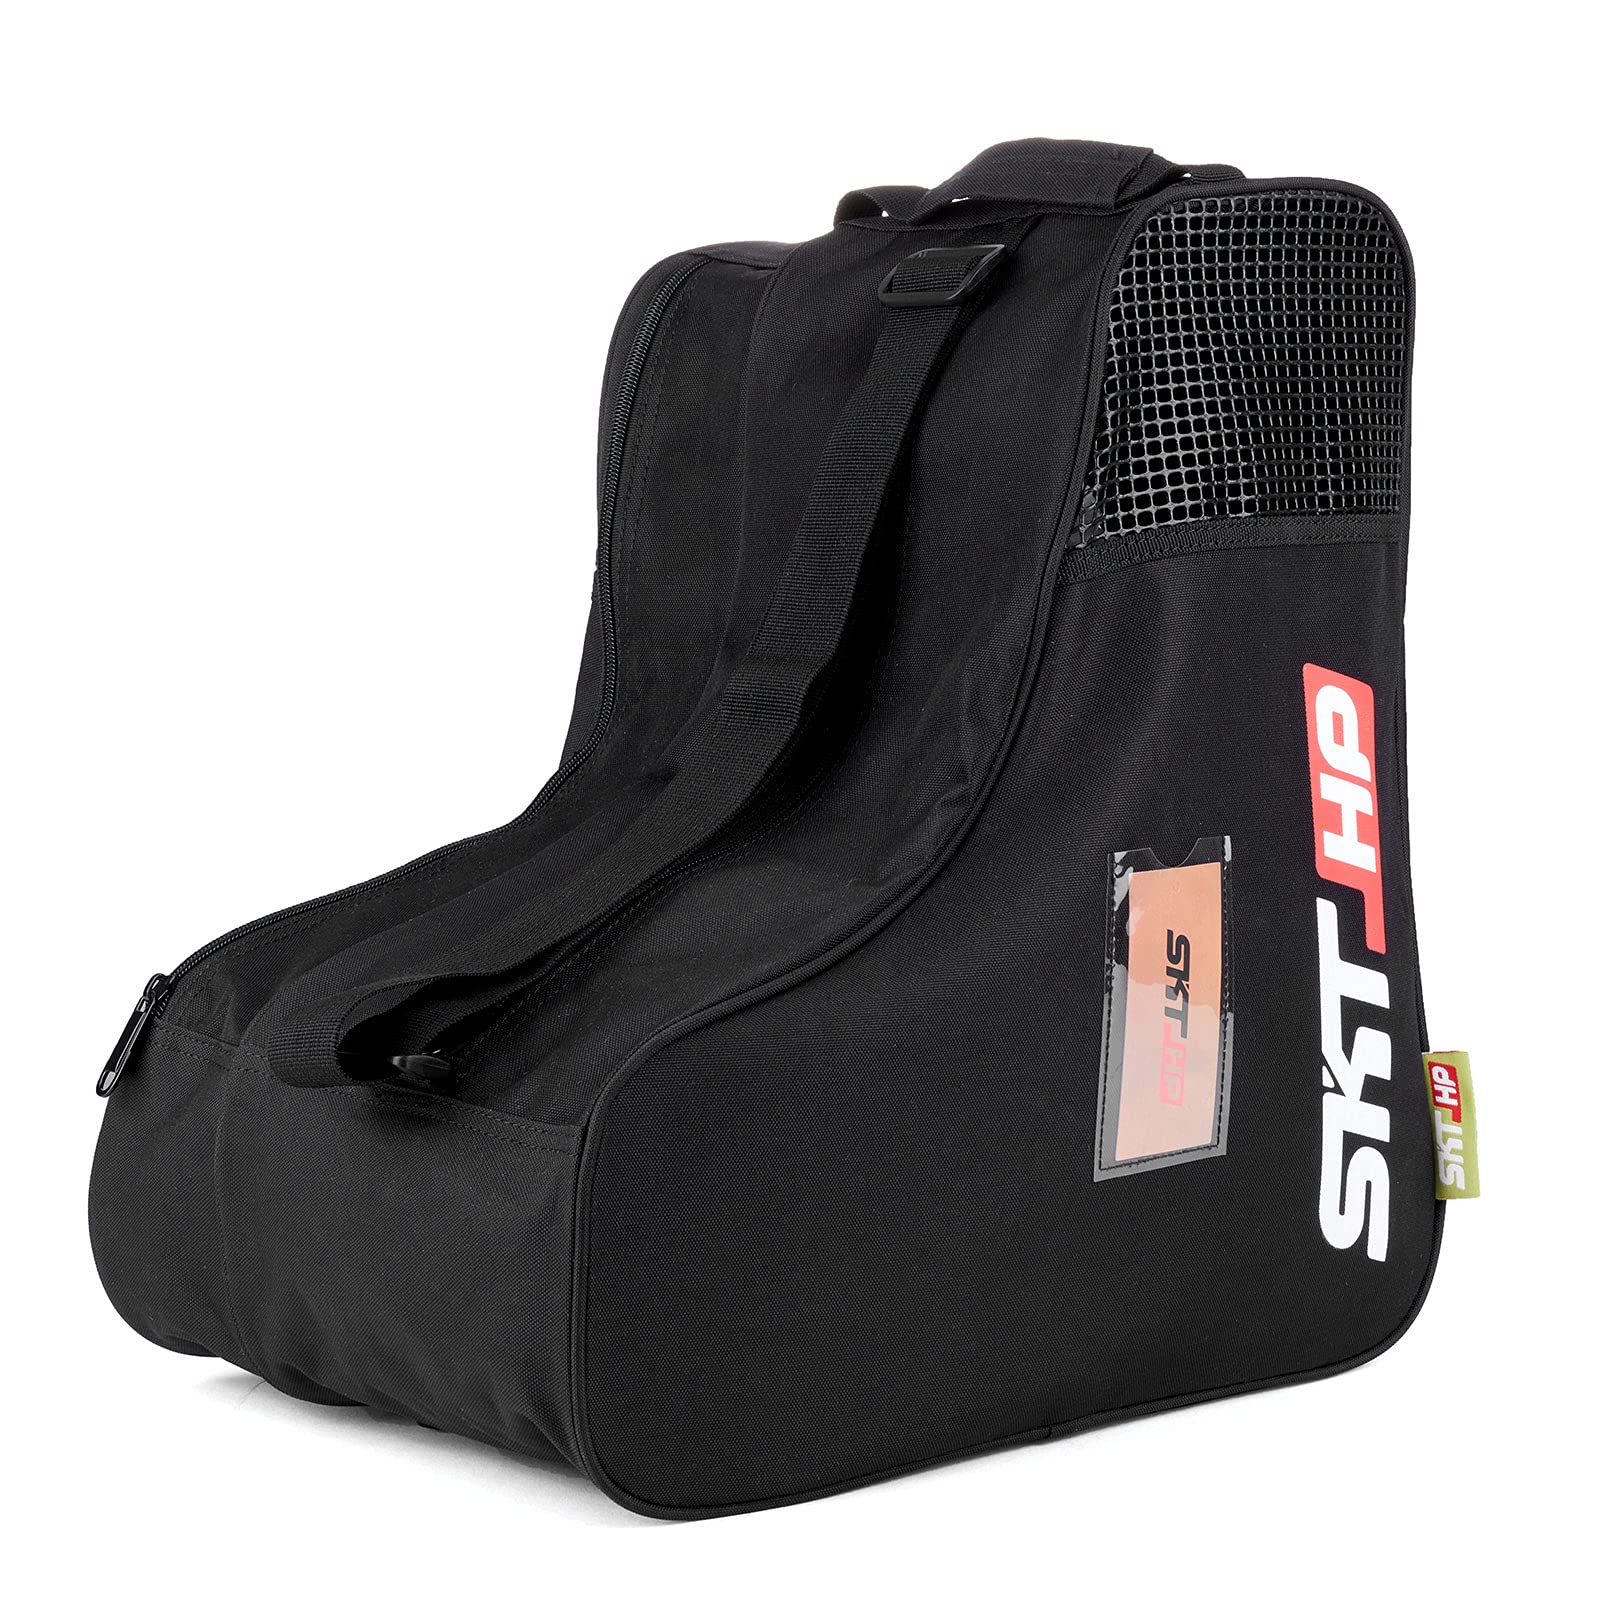 Roller Skate Bag, Breathable Ice Skate Bags with Adjustable